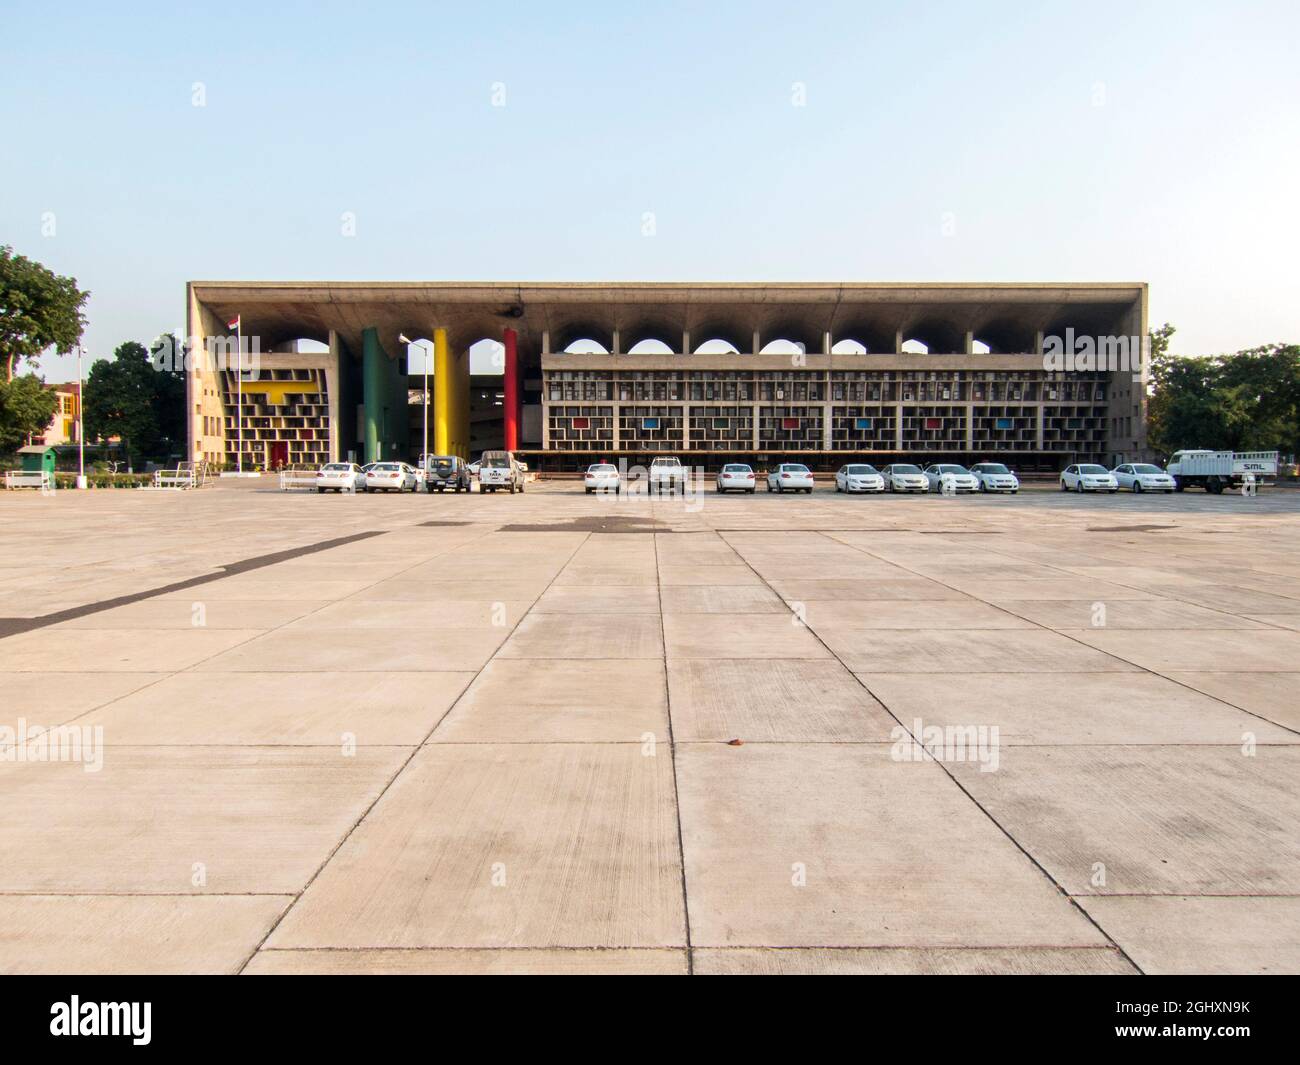 High Court Projected by architect Le Corbusier Chandigarh (capital of Punjab and Haryana) - India  [Suprema Corte de Chandigarh, projetada pelo arquit Stock Photo